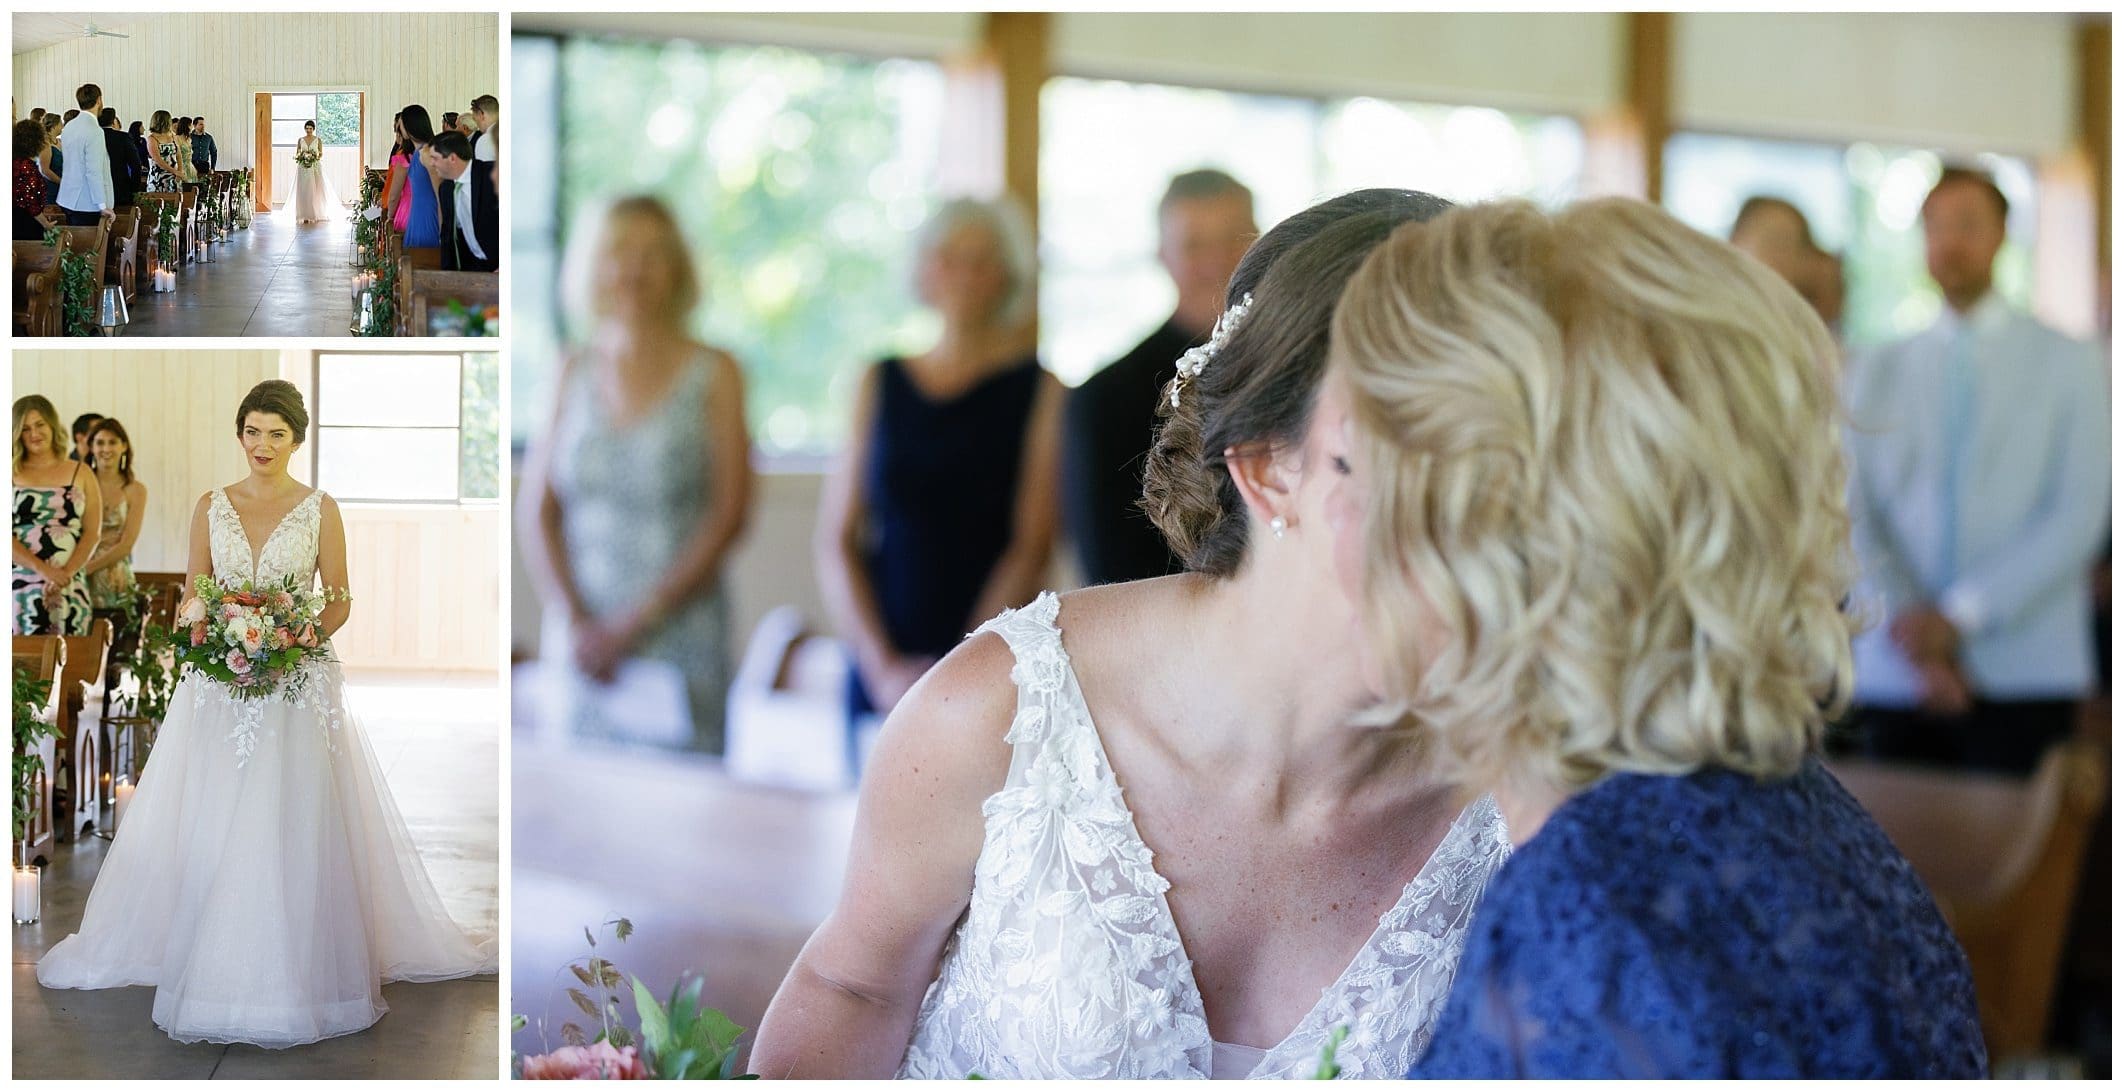 A bride walks down the aisle with her mother.